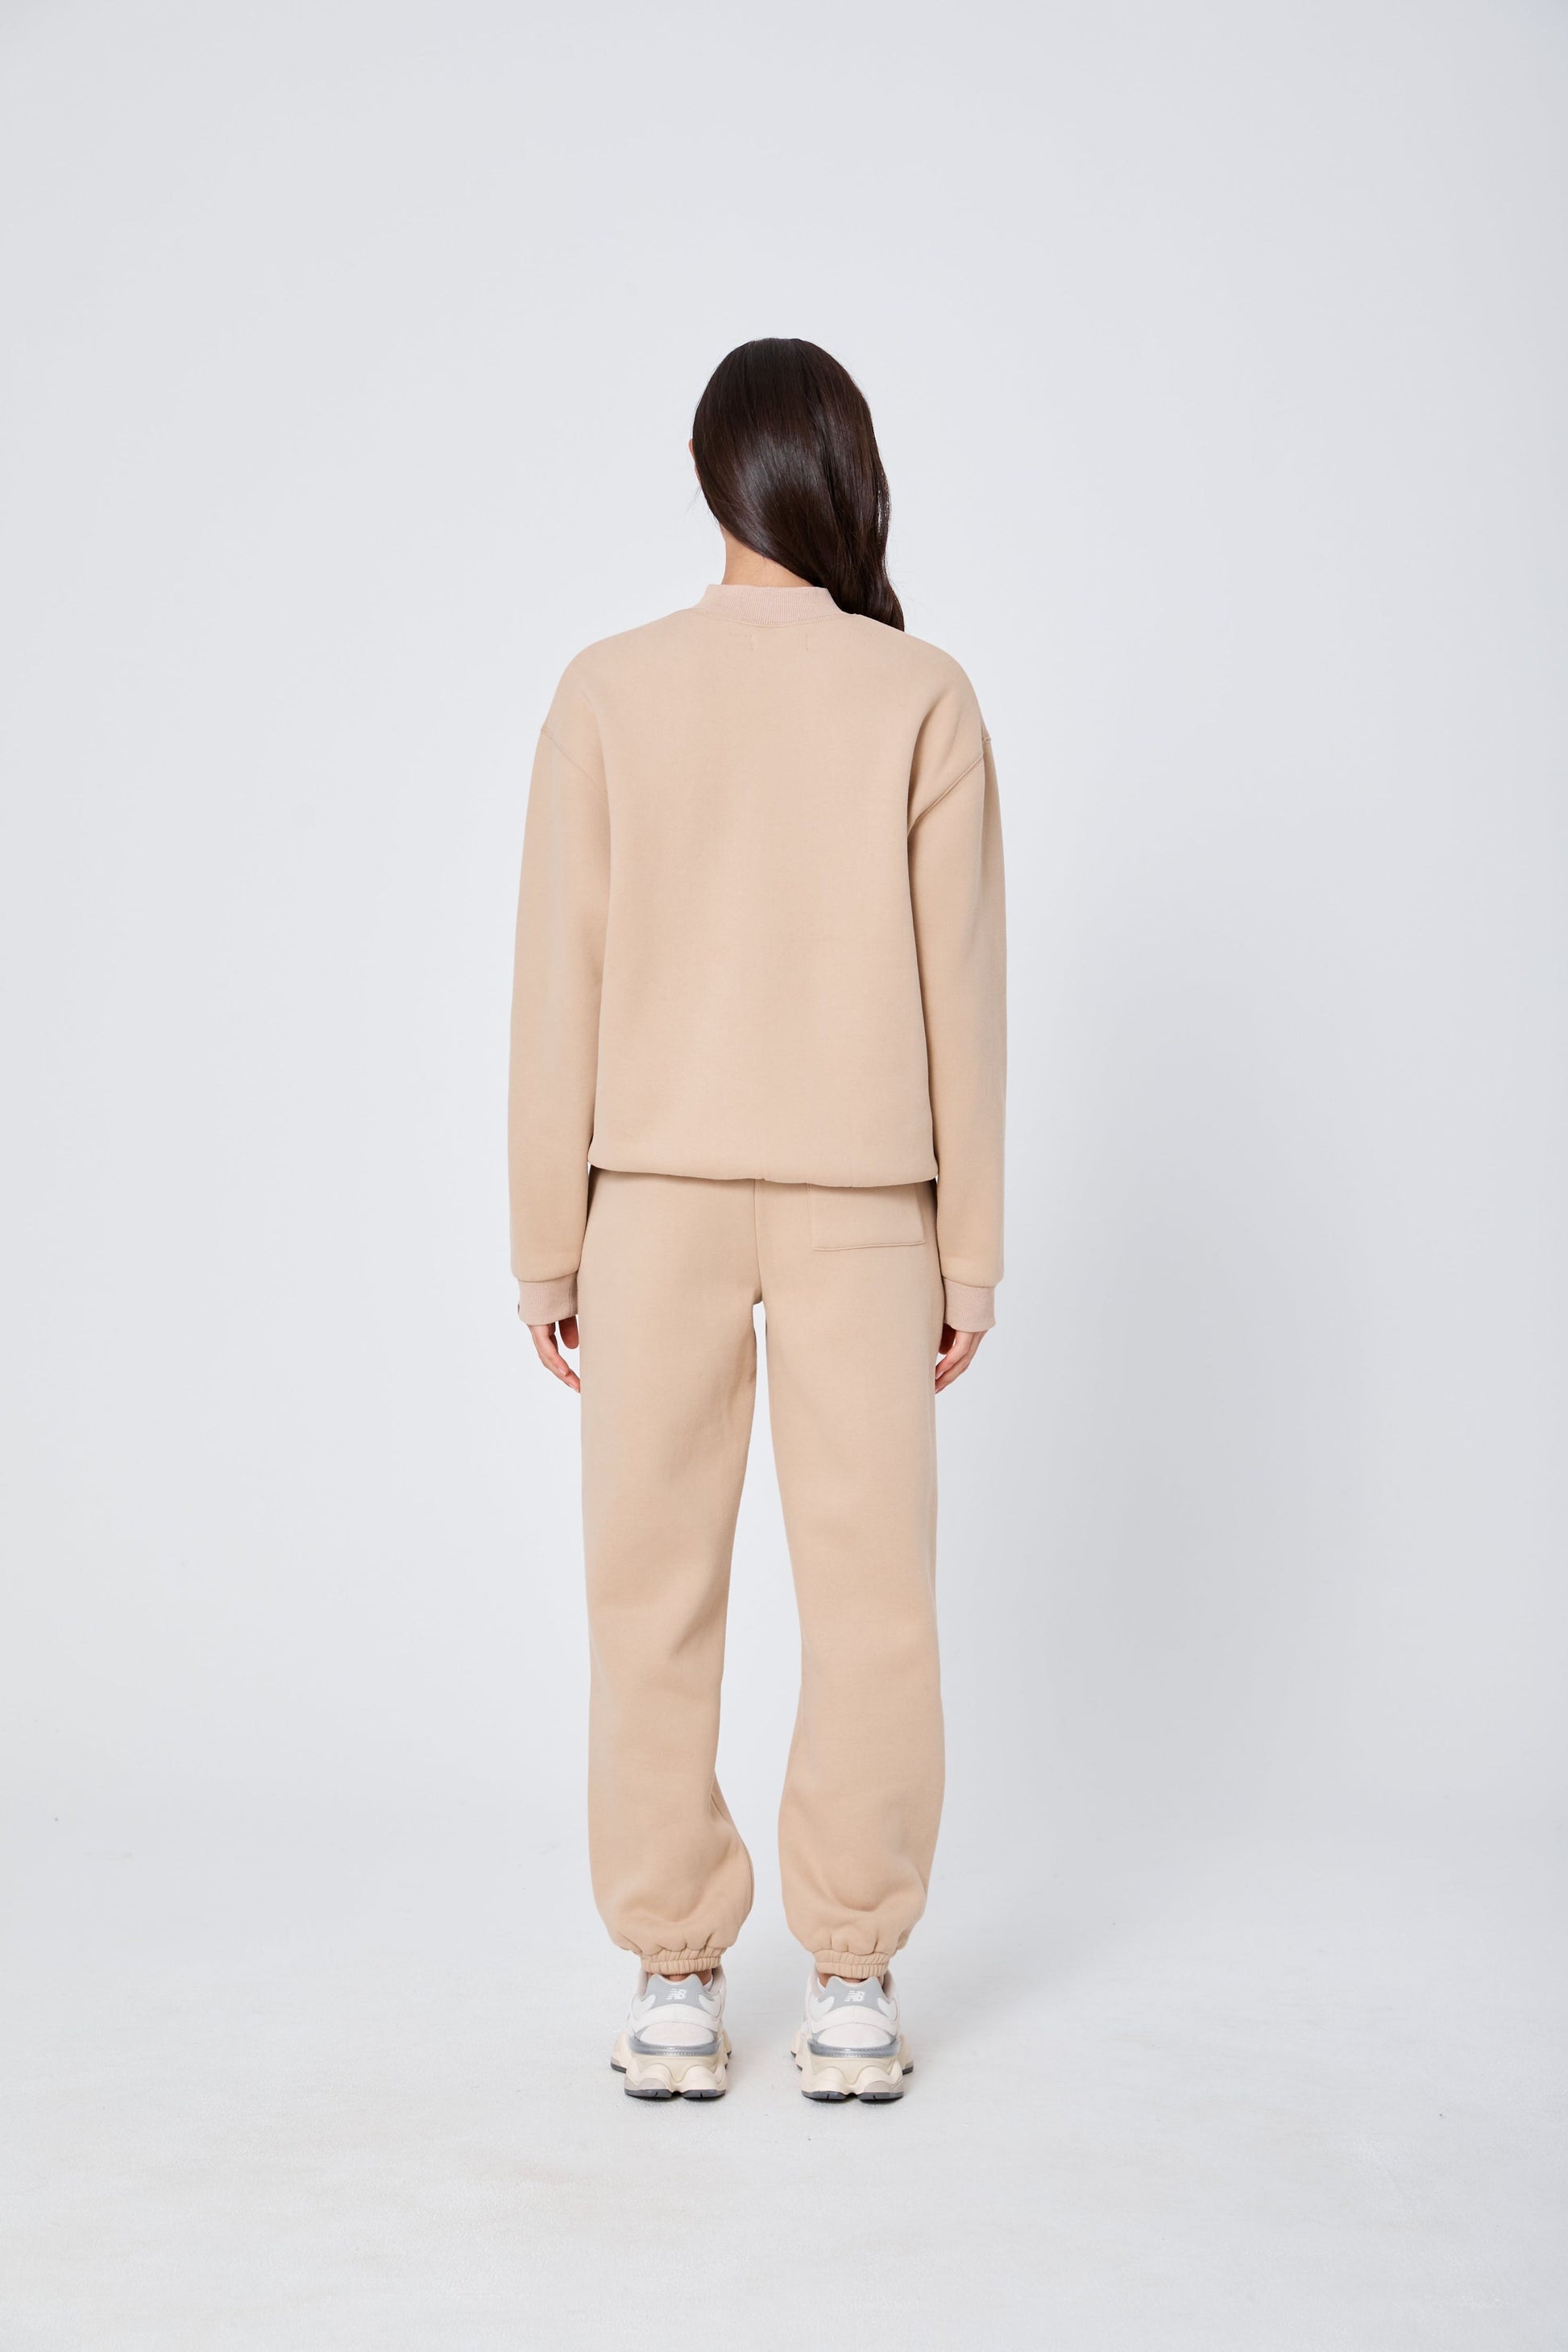 The Trackpant in Sand by Atoir X Rozalia Re Edition